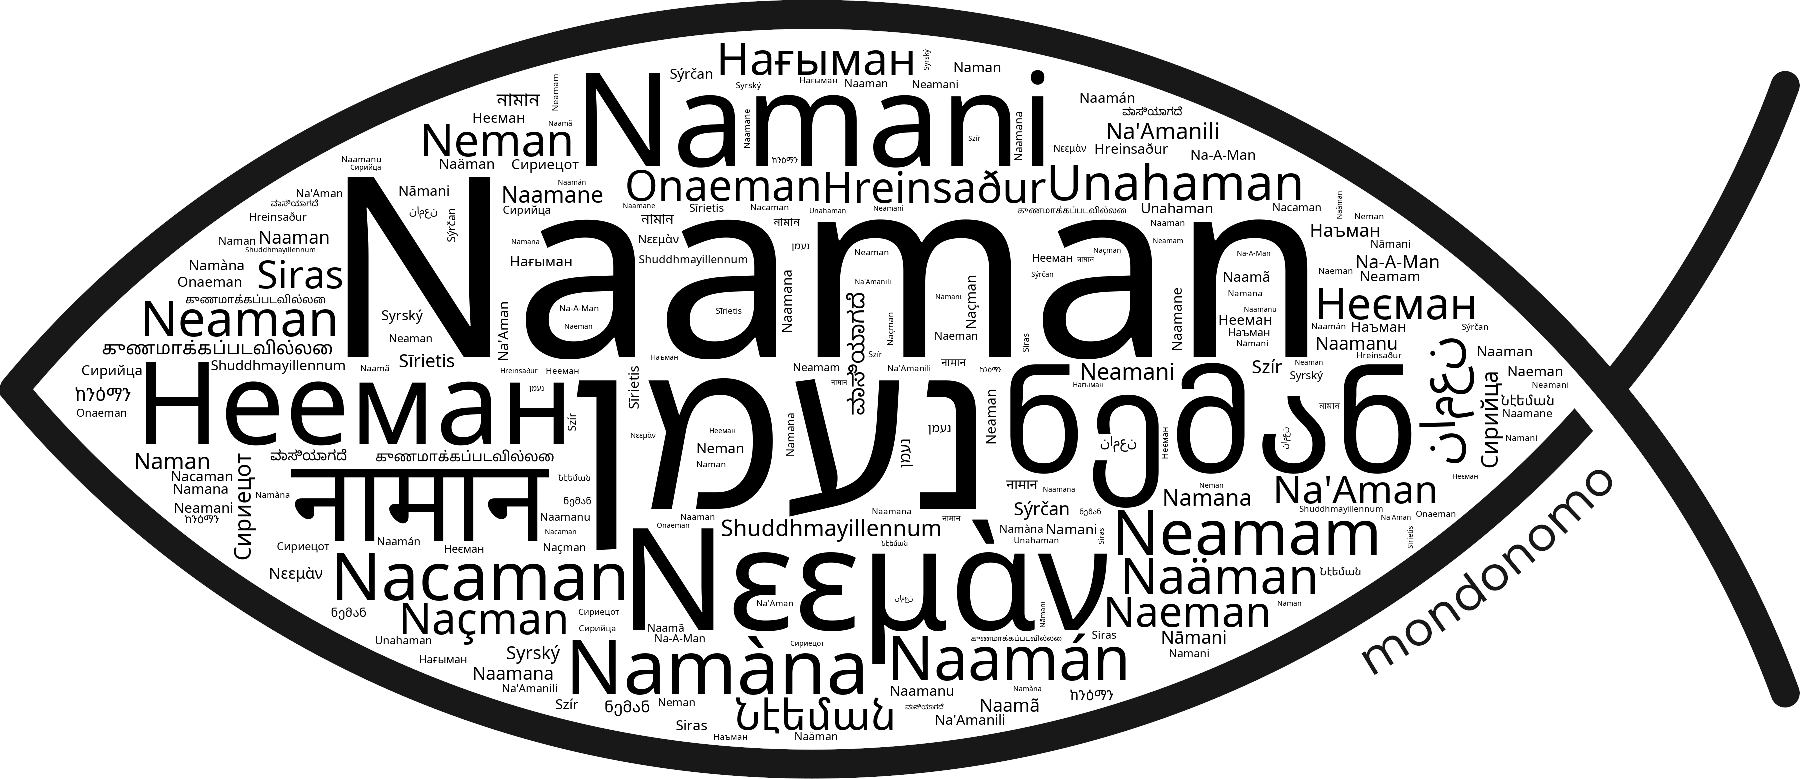 Name Naaman in the world's Bibles